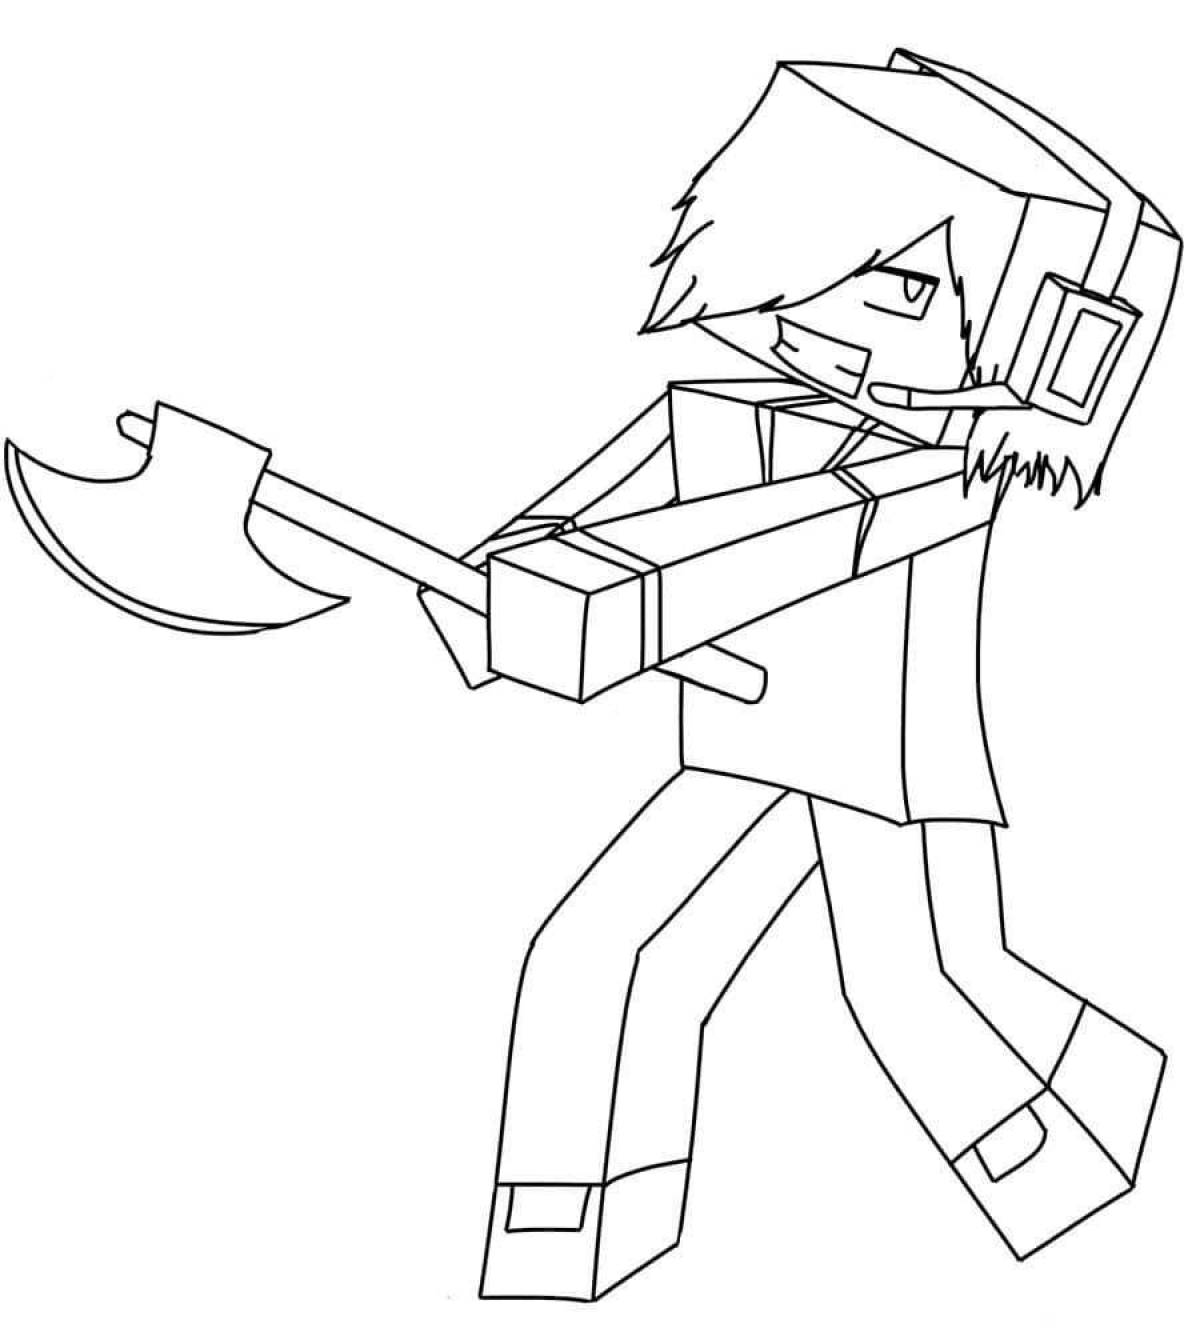 Adorable minecraft dungeon coloring page